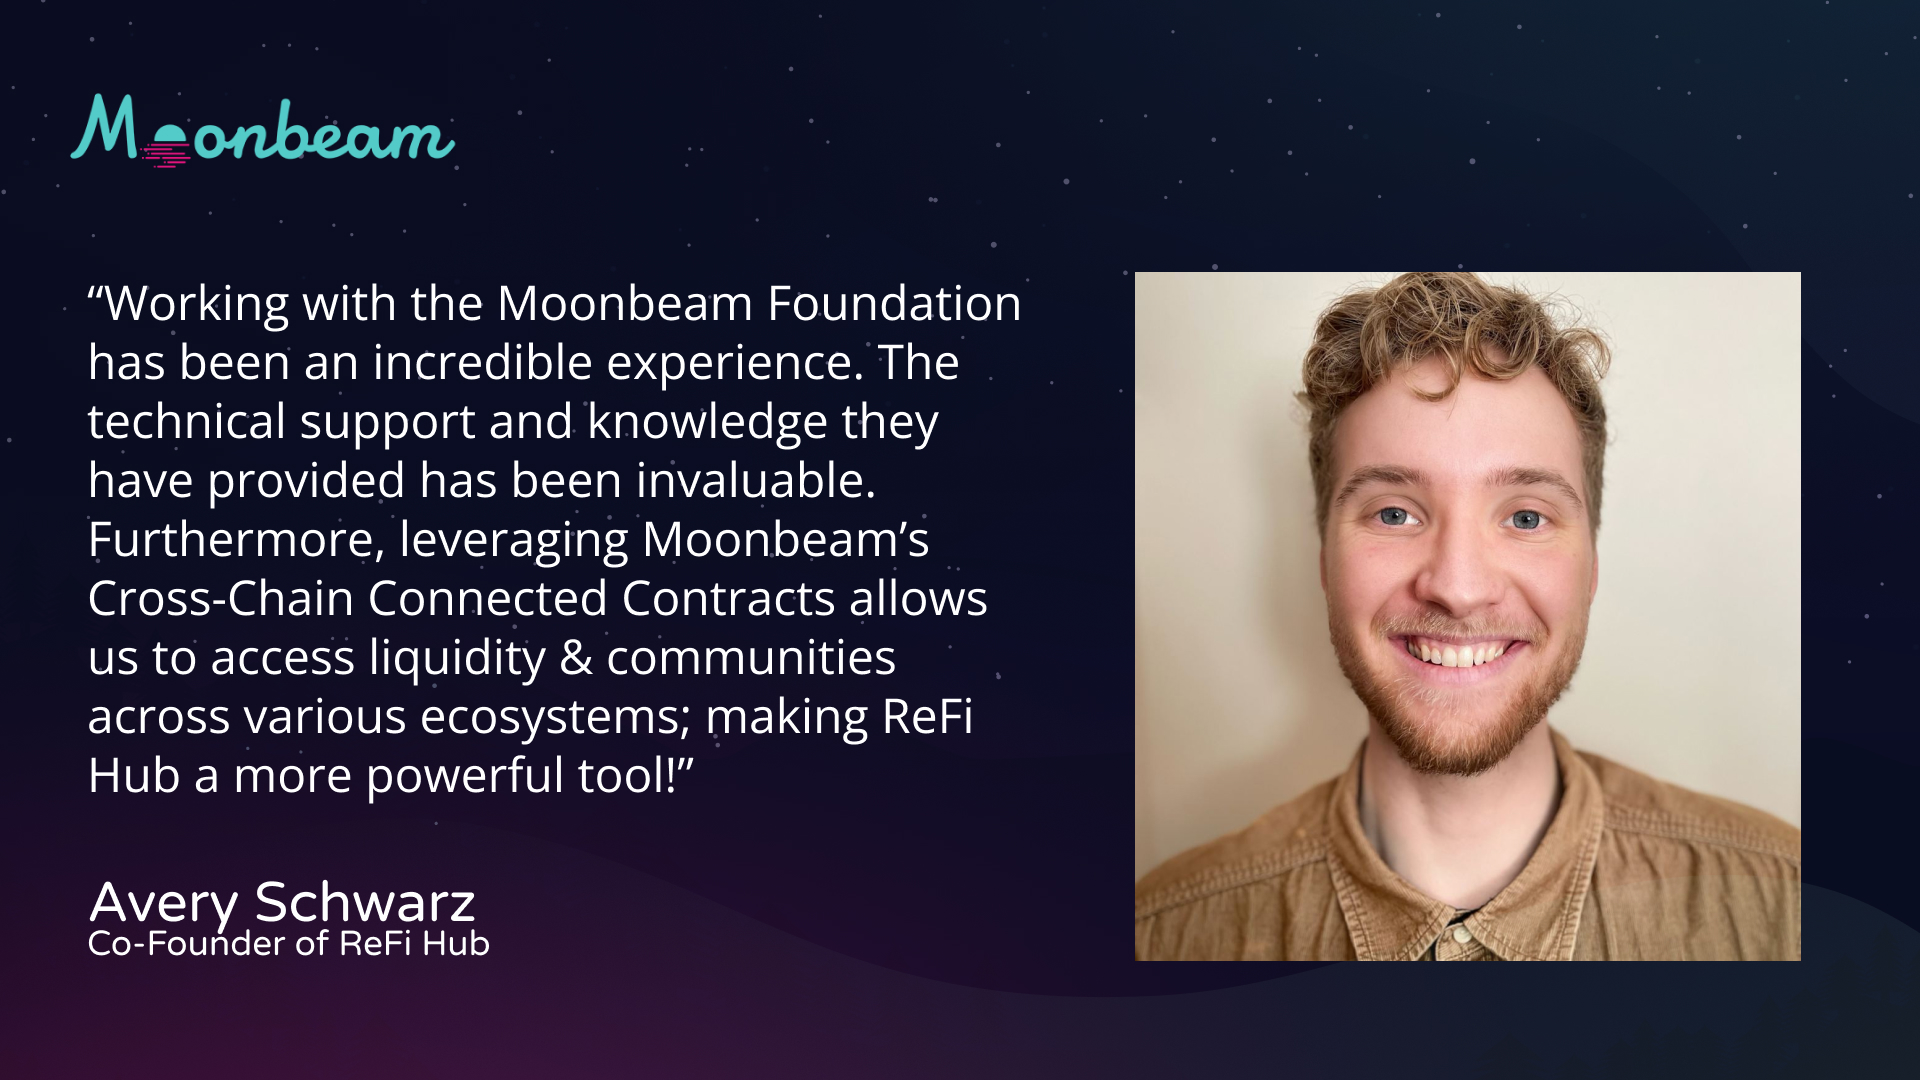 Testimonial by Avery Schwartz, Co-Founder of ReFi Hub, praising the Moonbeam Foundation support and technological prowess.